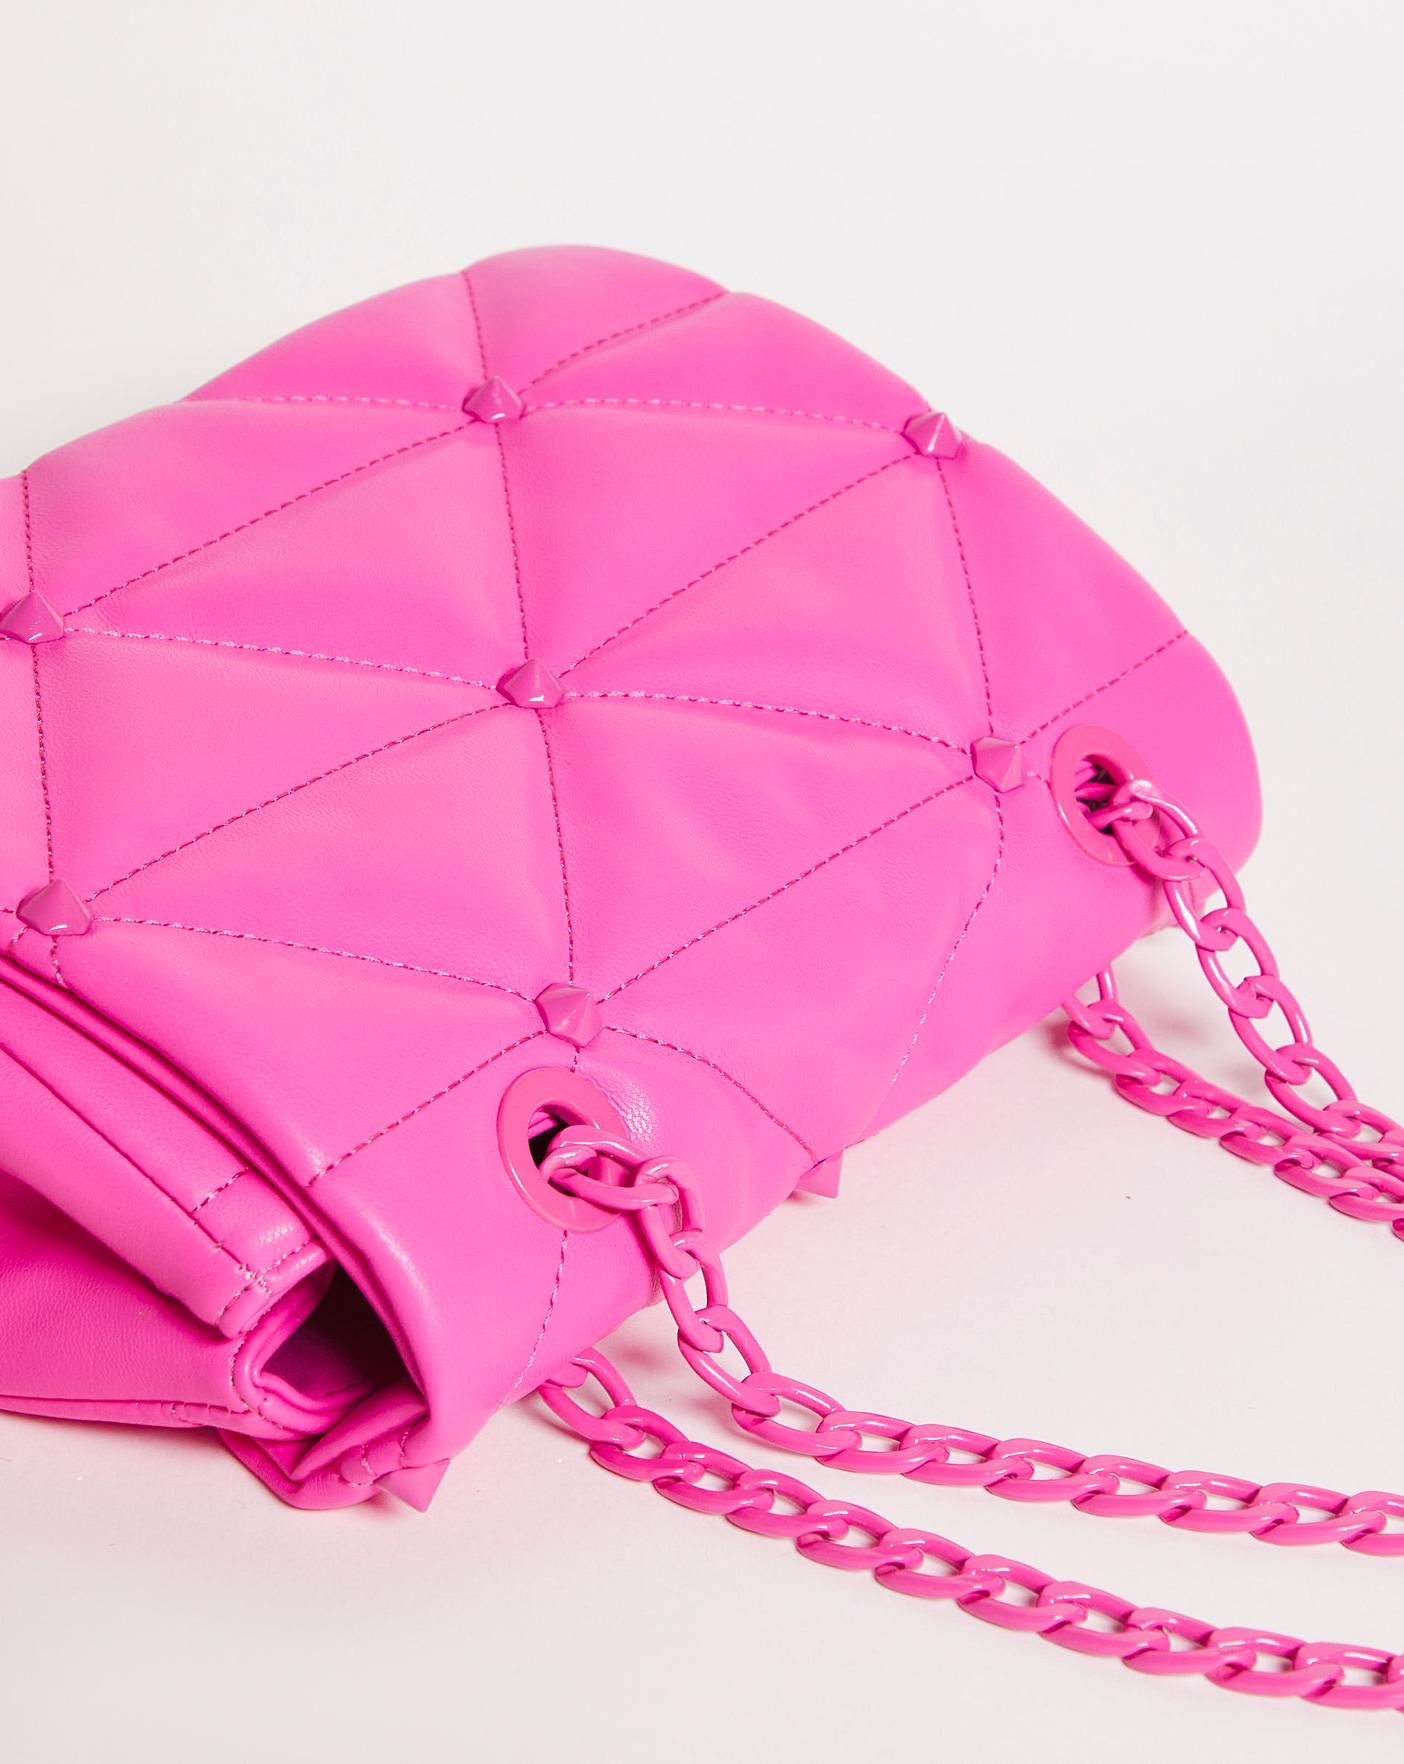 Chanel 2021 Classic Flap Phone Holder on Chain - Pink Crossbody